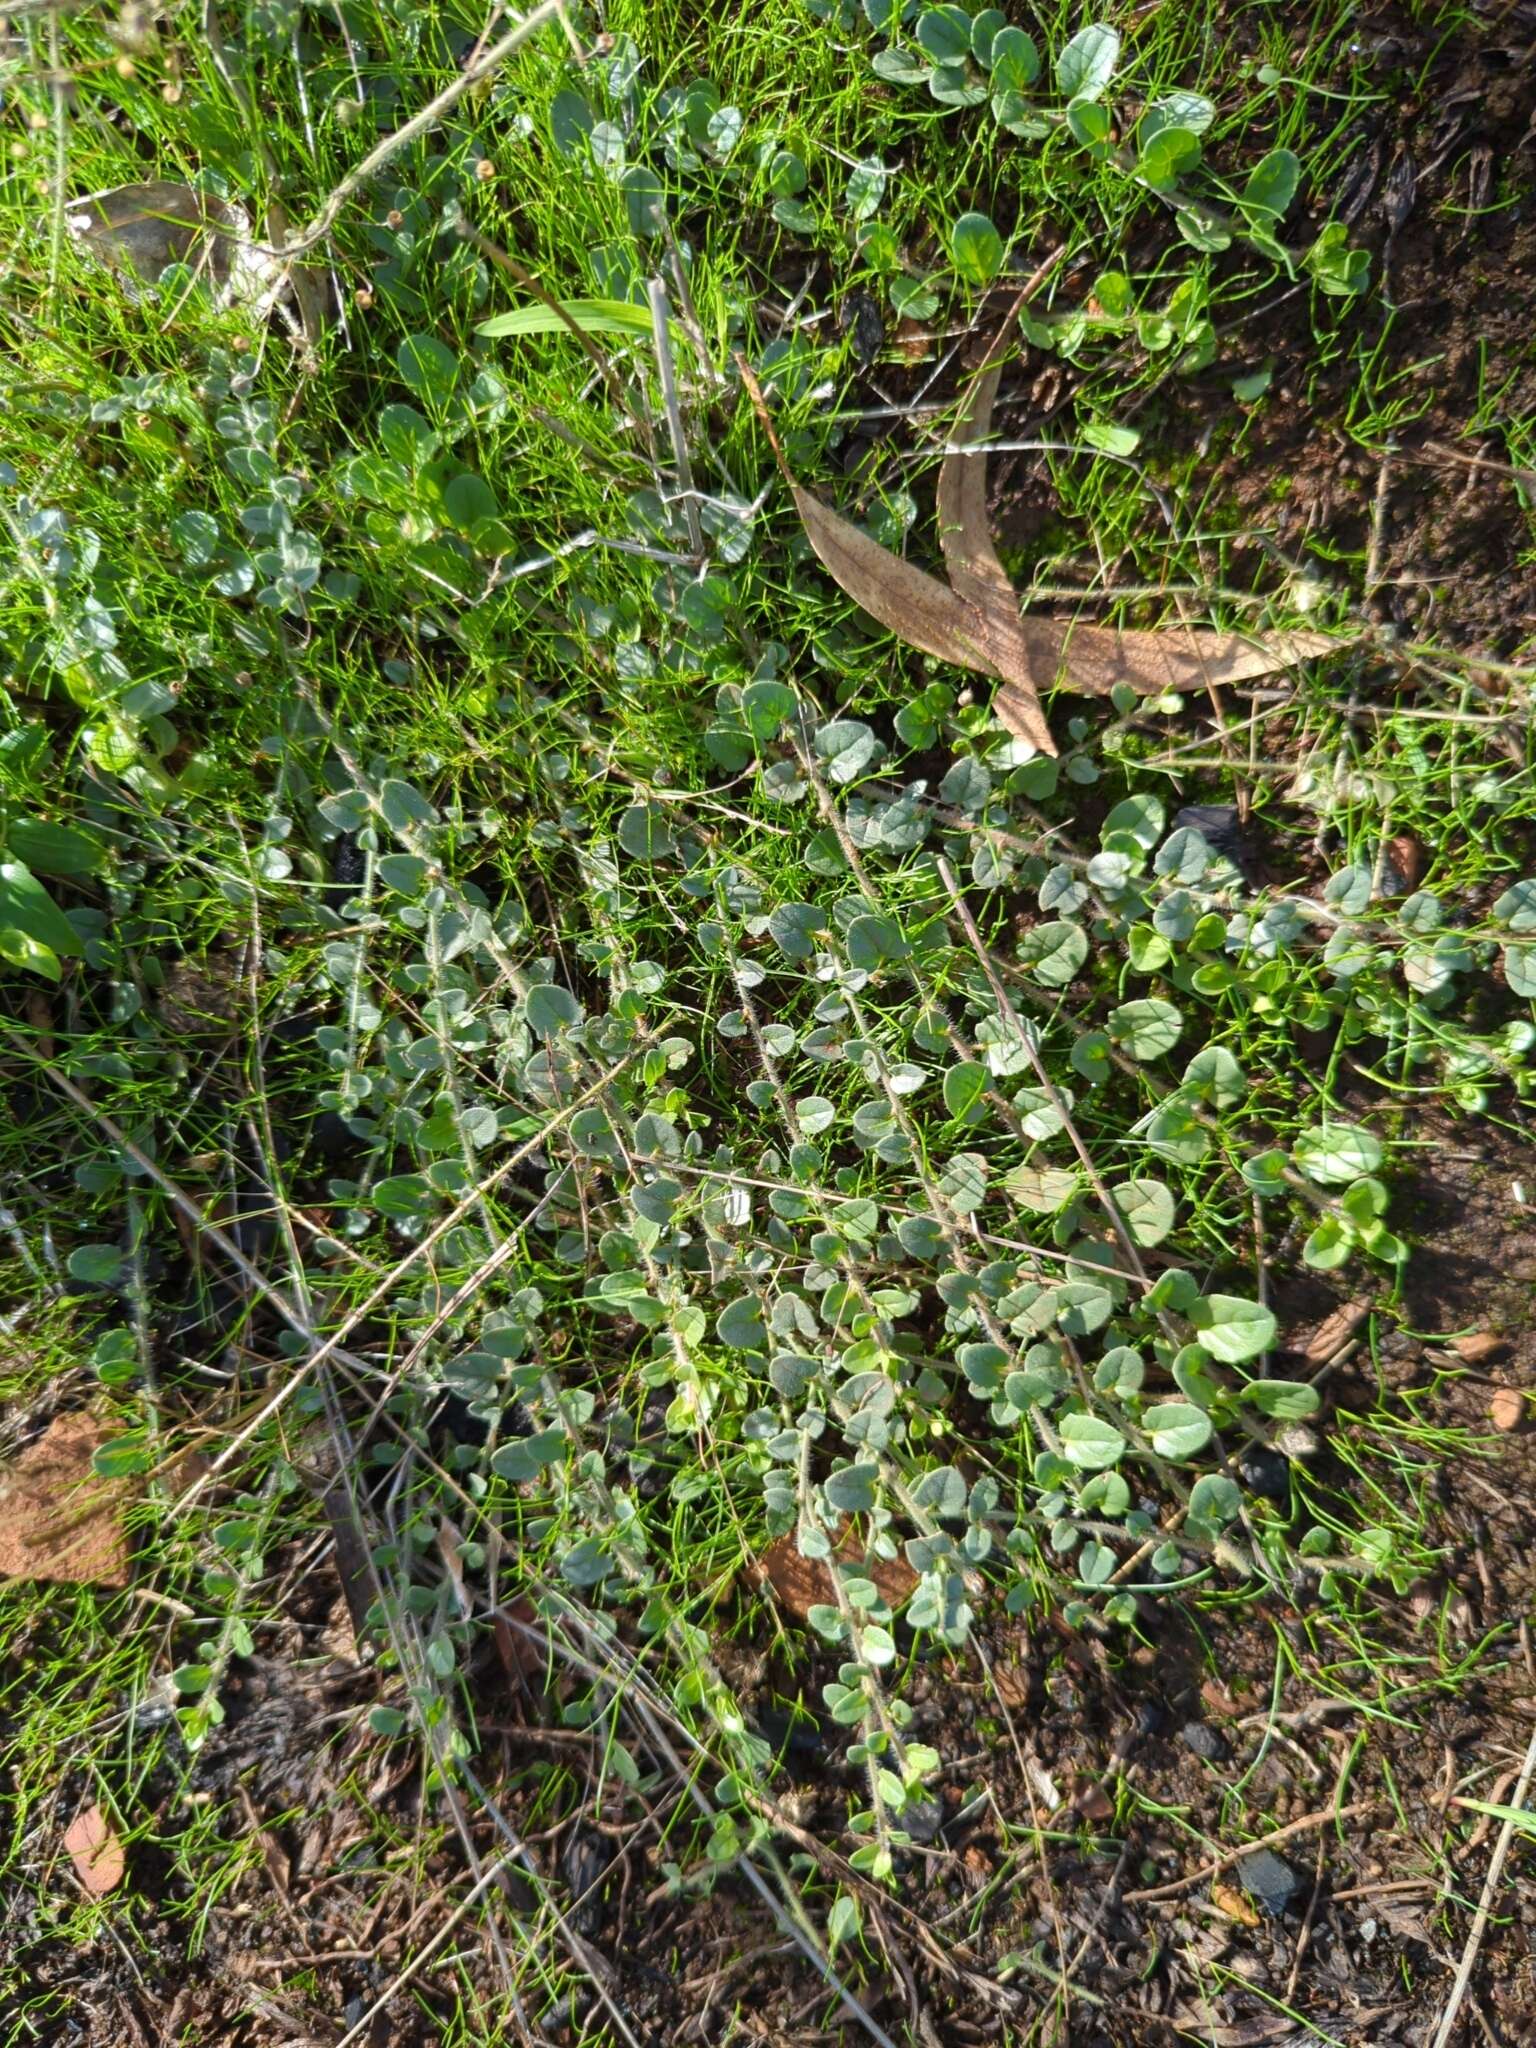 Image of Kickxia spuria subsp. integrifolia (Brot.) R. Fernandes